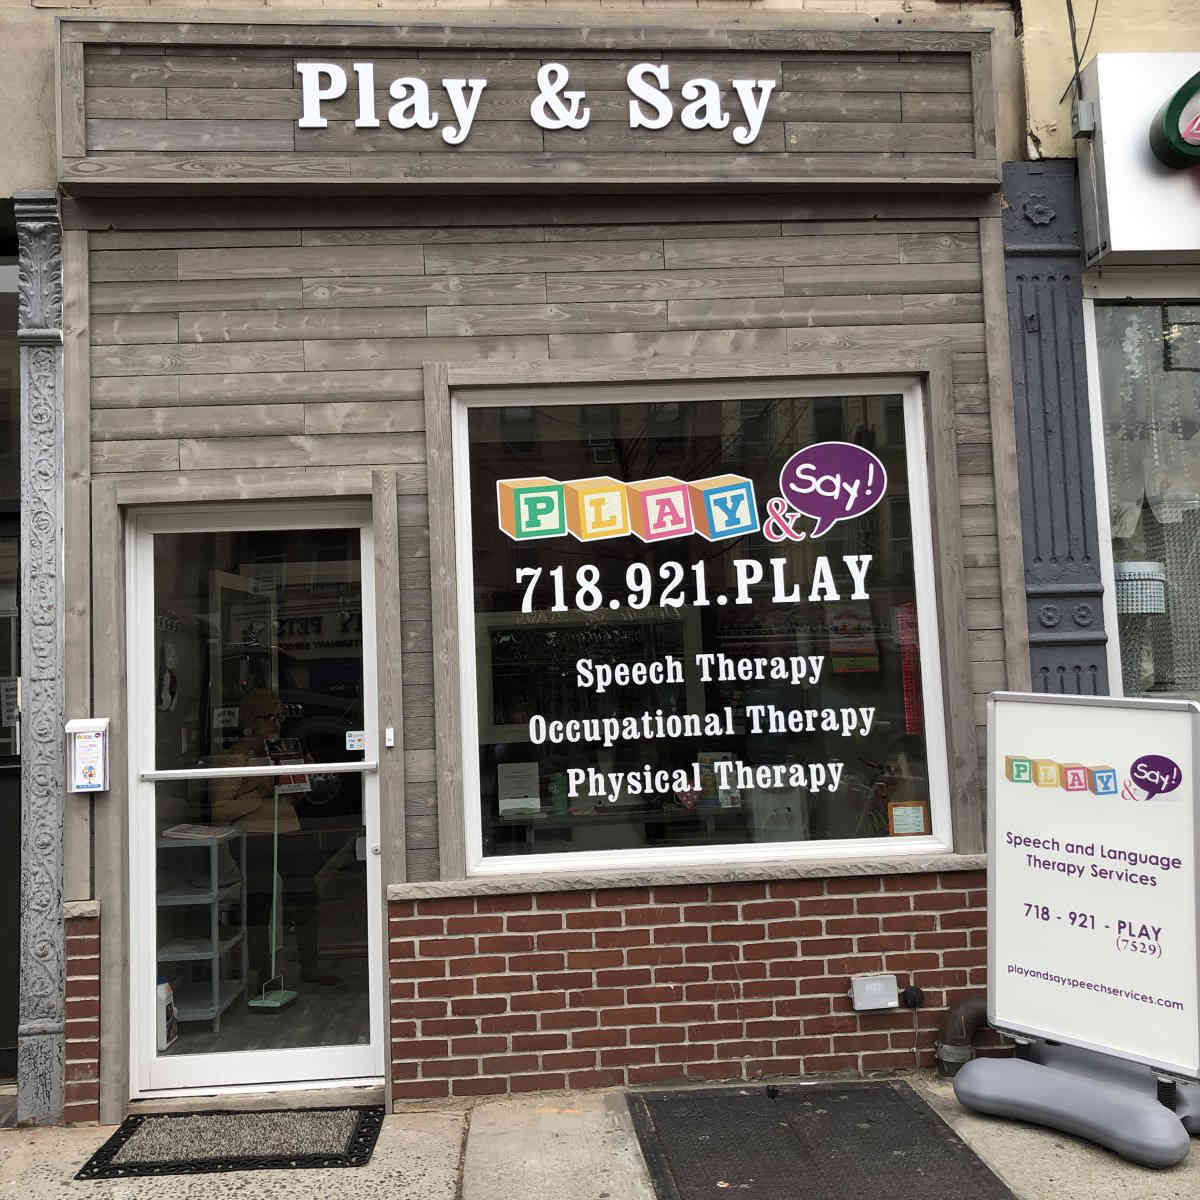 Bay Ridge kids’ therapy practice expands to bigger space